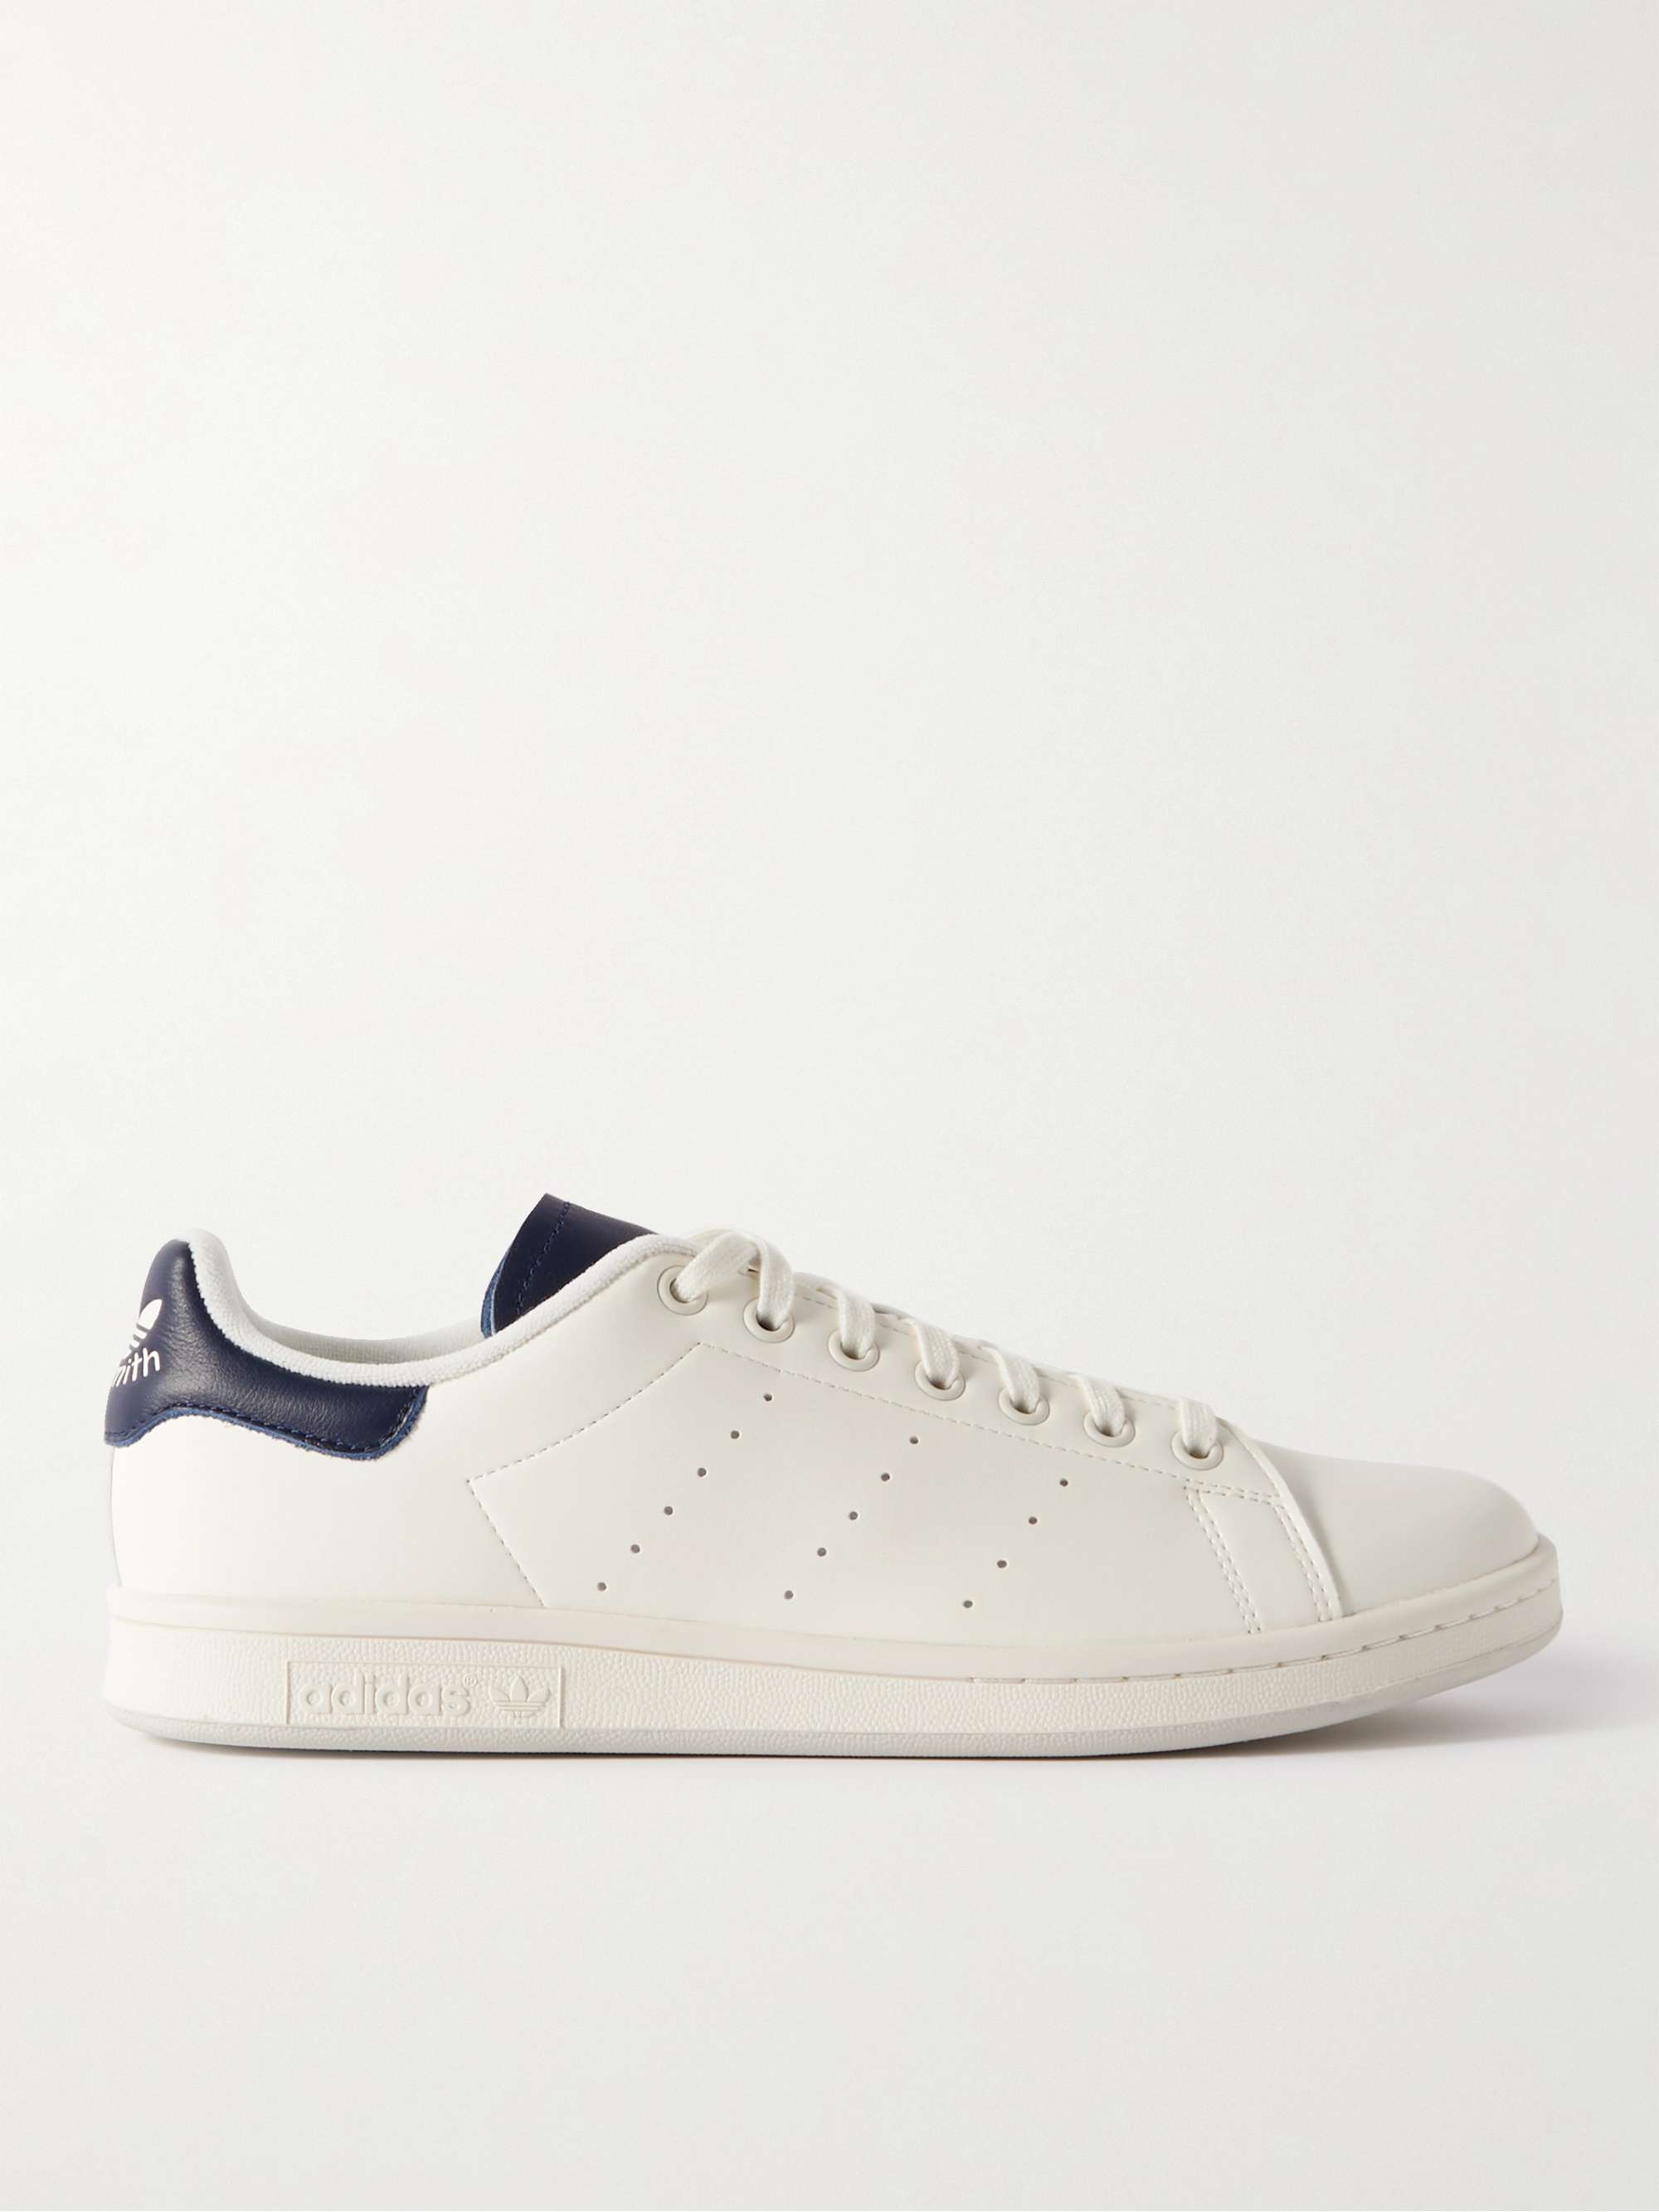 ADIDAS ORIGINALS Stan Smith Leather Sneakers for Men | MR PORTER